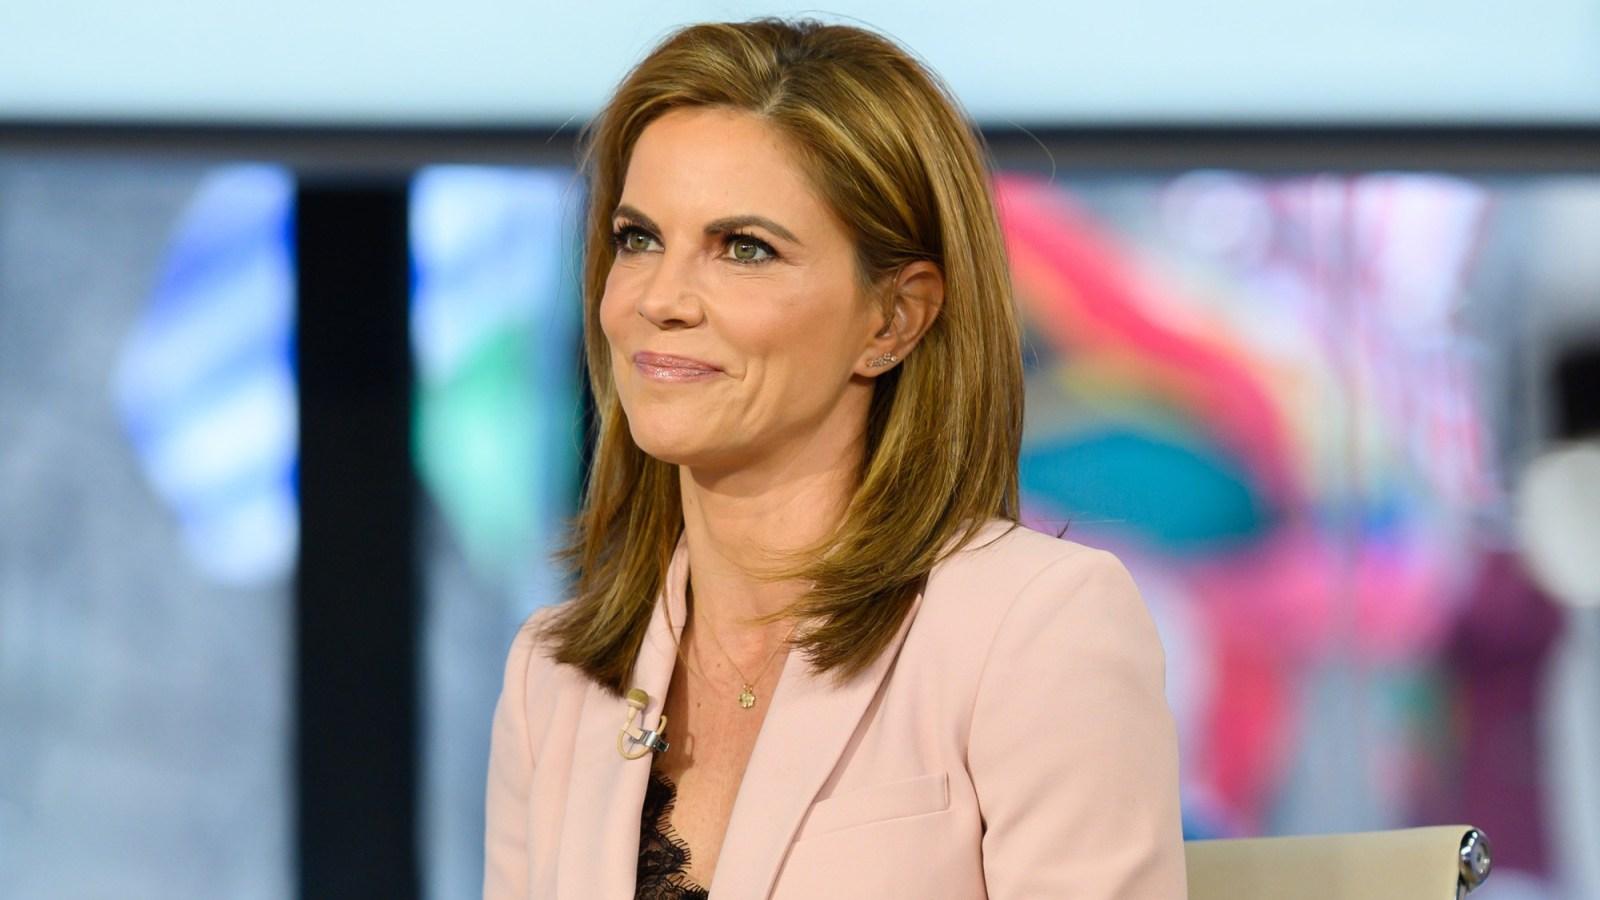 Natalie Morales Exits 'Access Hollywood' After 3 Years